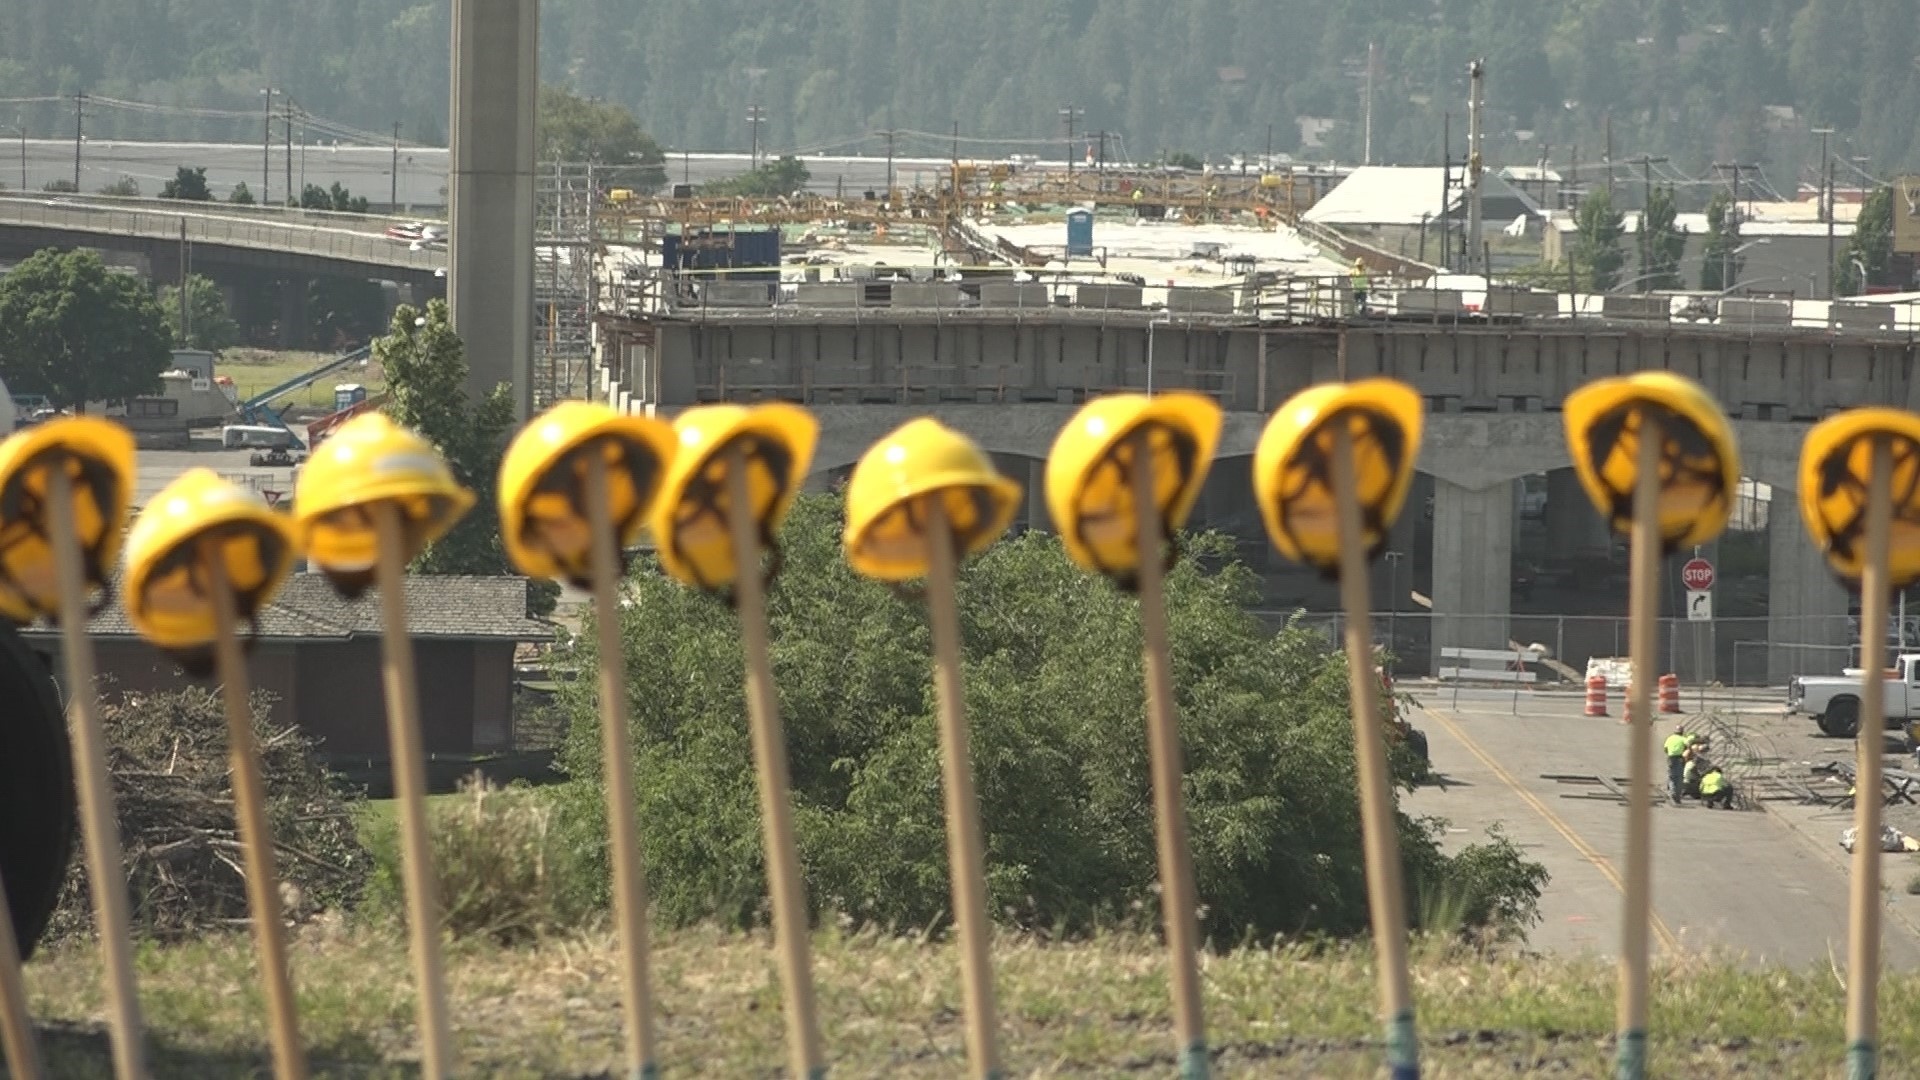 The Spokane River Crossing will connect the current project north of the river and construction near Spokane Community College.